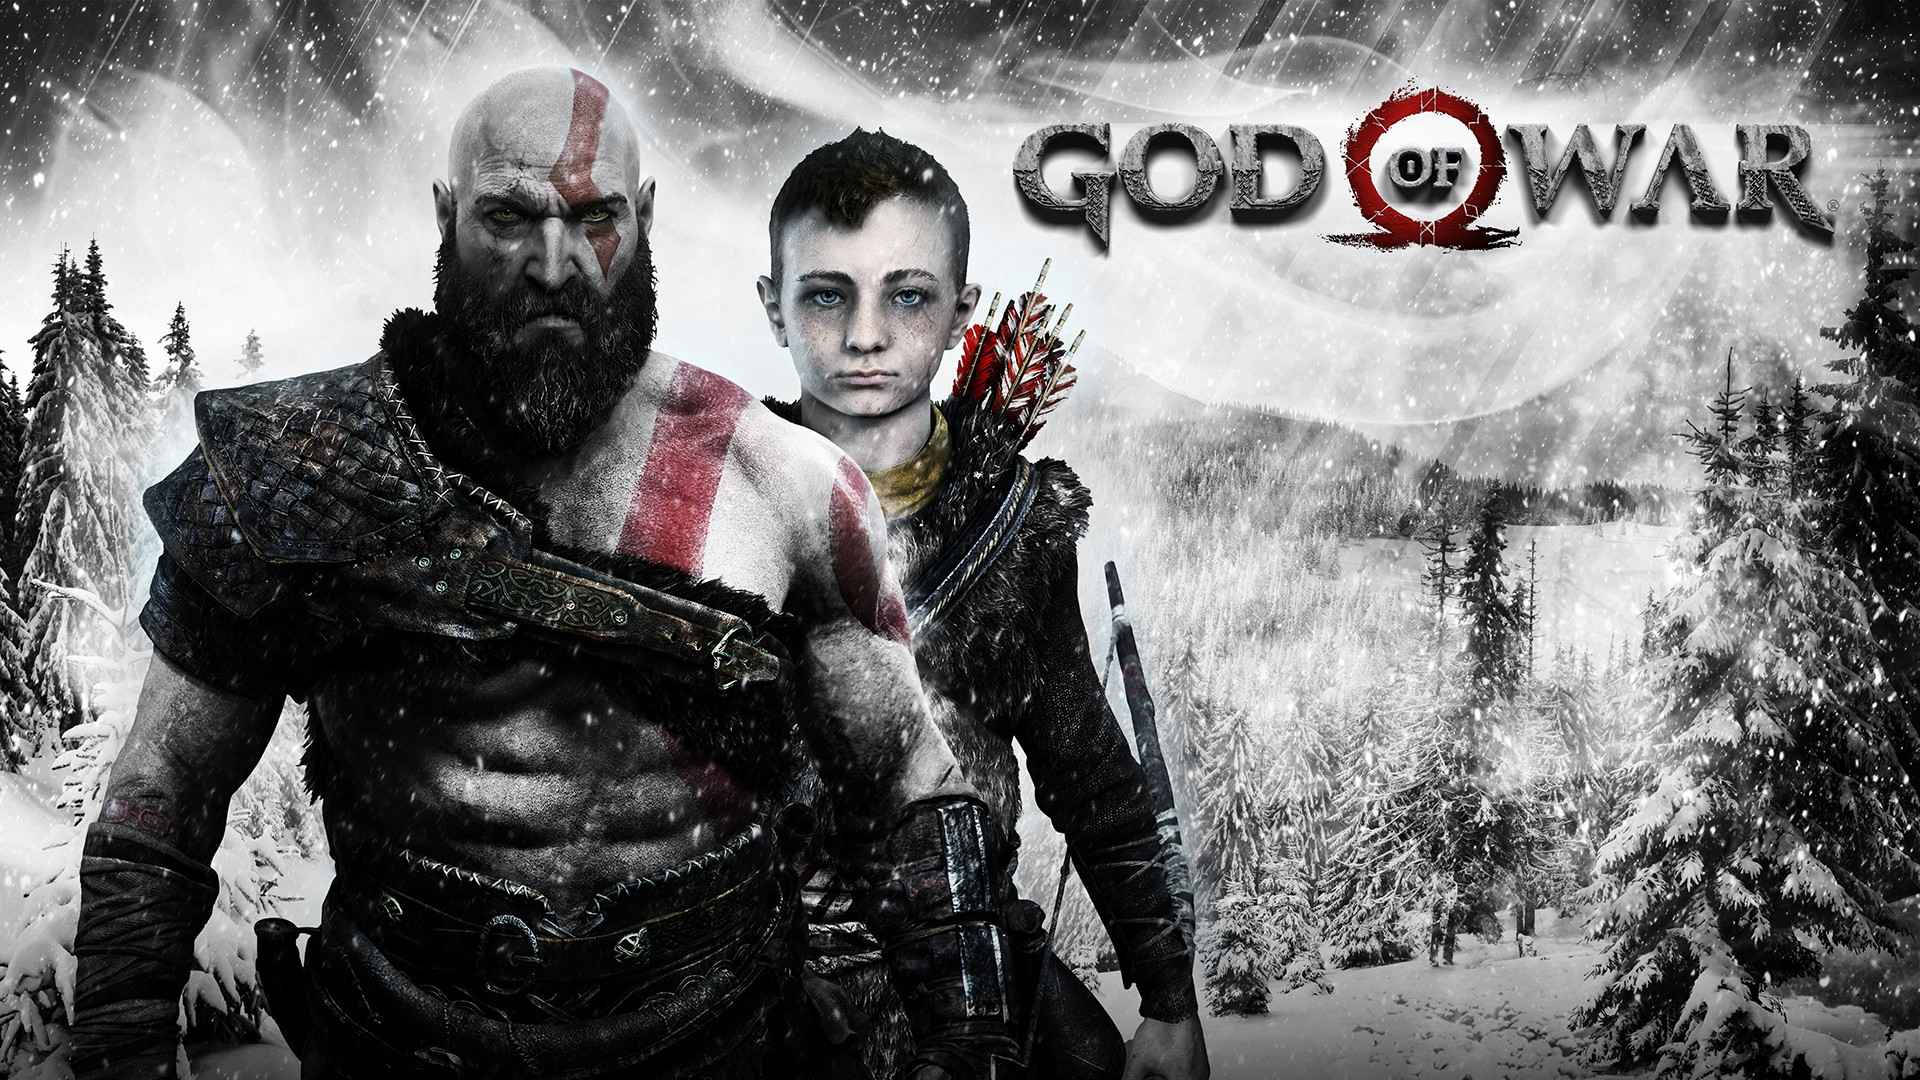 Portrait of Kratos and Atreus, a father and son duo, in the mythical world of God of War. Wallpaper